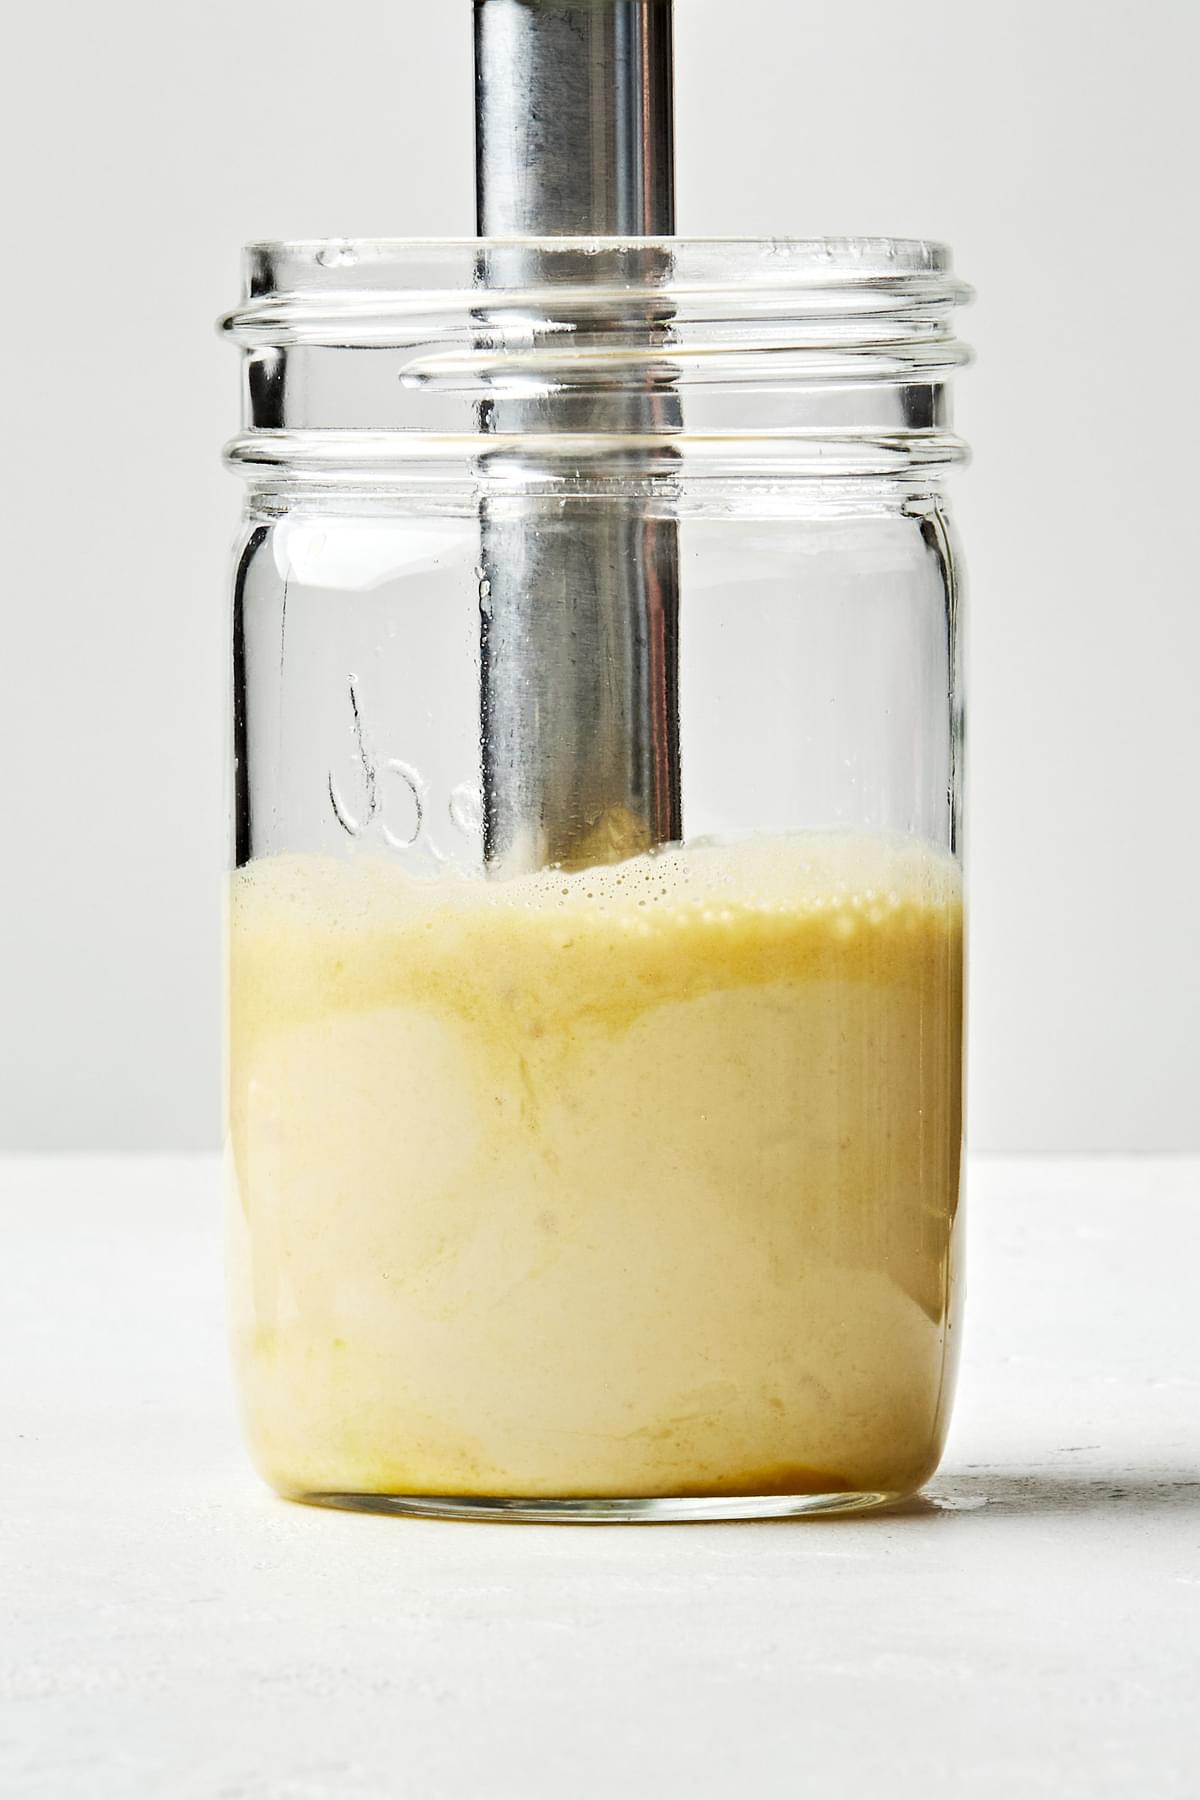 homemade caesar dressing being blended together in a glass jar with an immersion blender